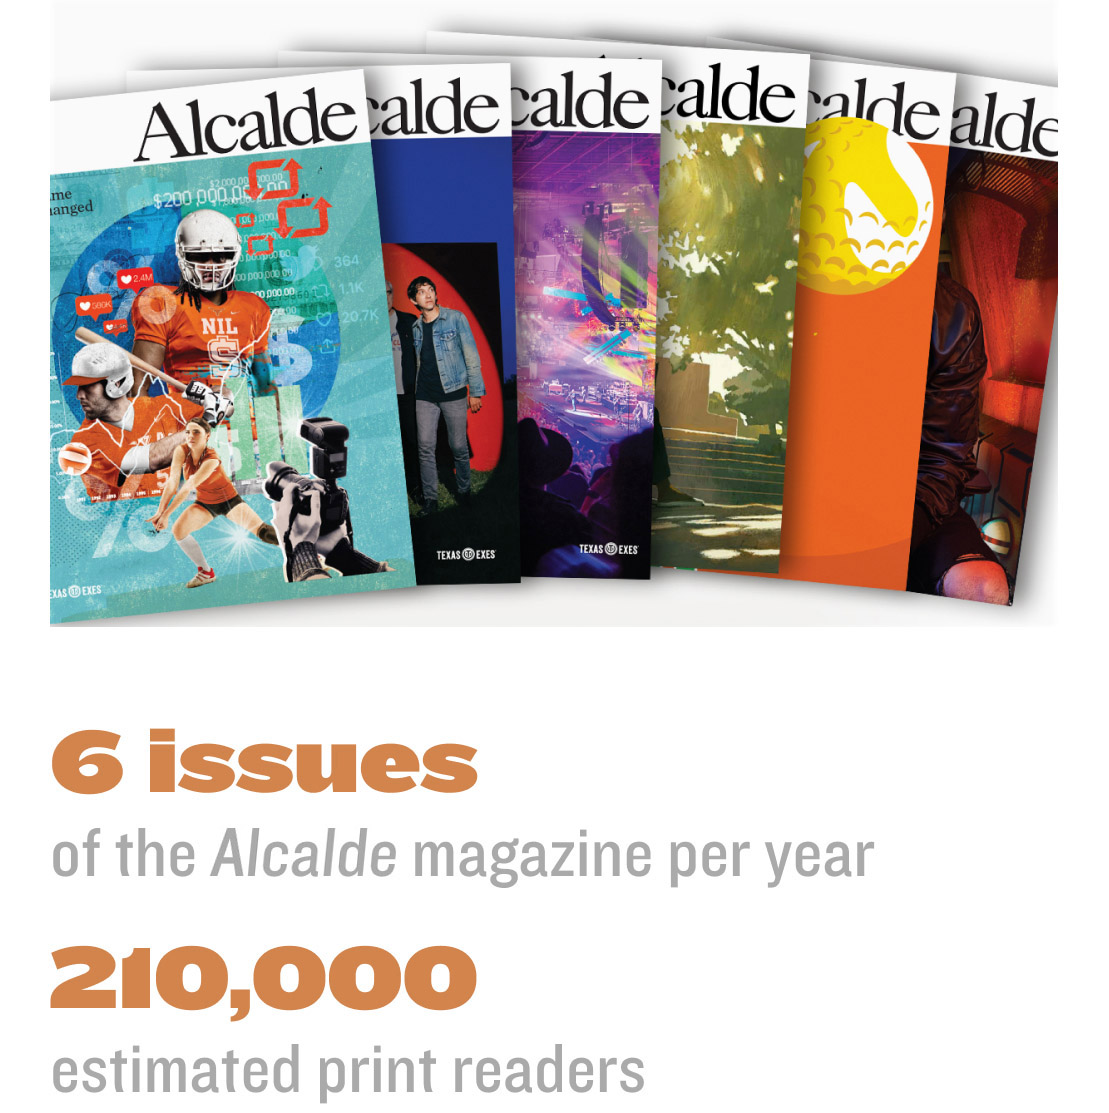 6 issues of the Alcalde magazine per year 210,000 estimated print readers